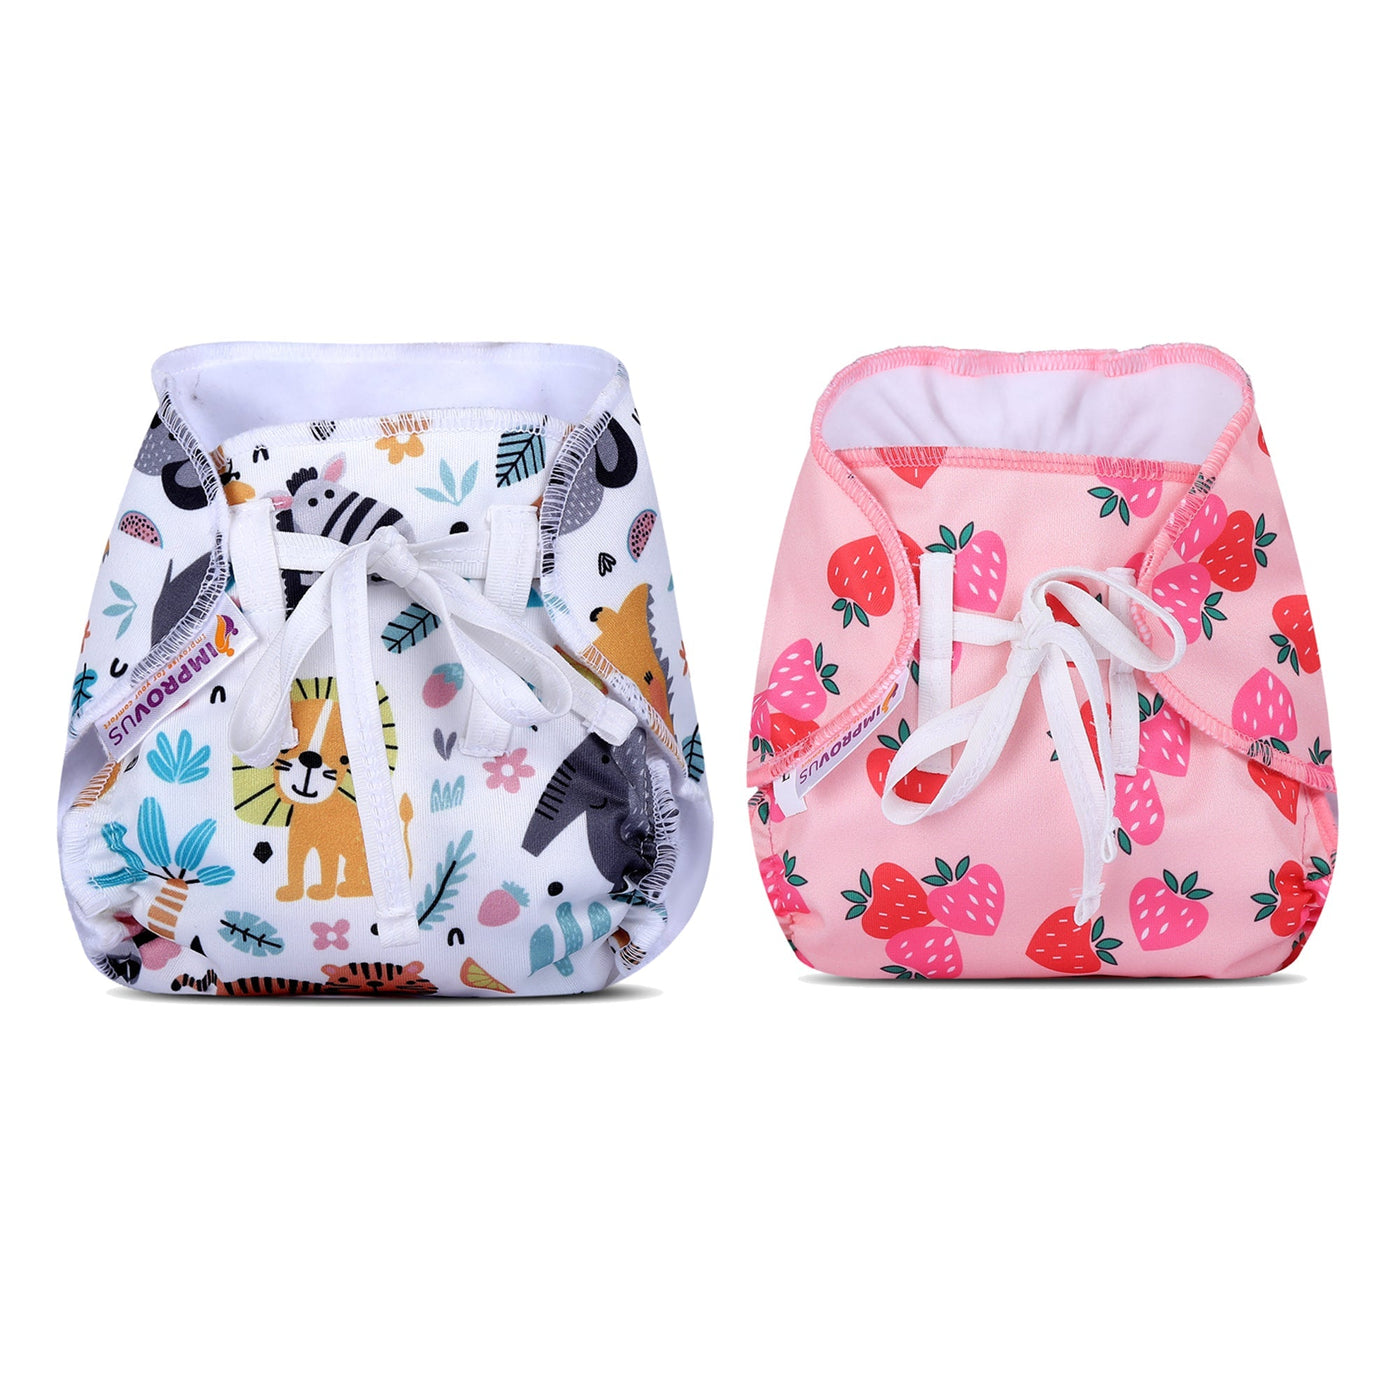 White & Baby Pink DryFeel Improvus Cloth Nappy - Langot (Pack of 2)